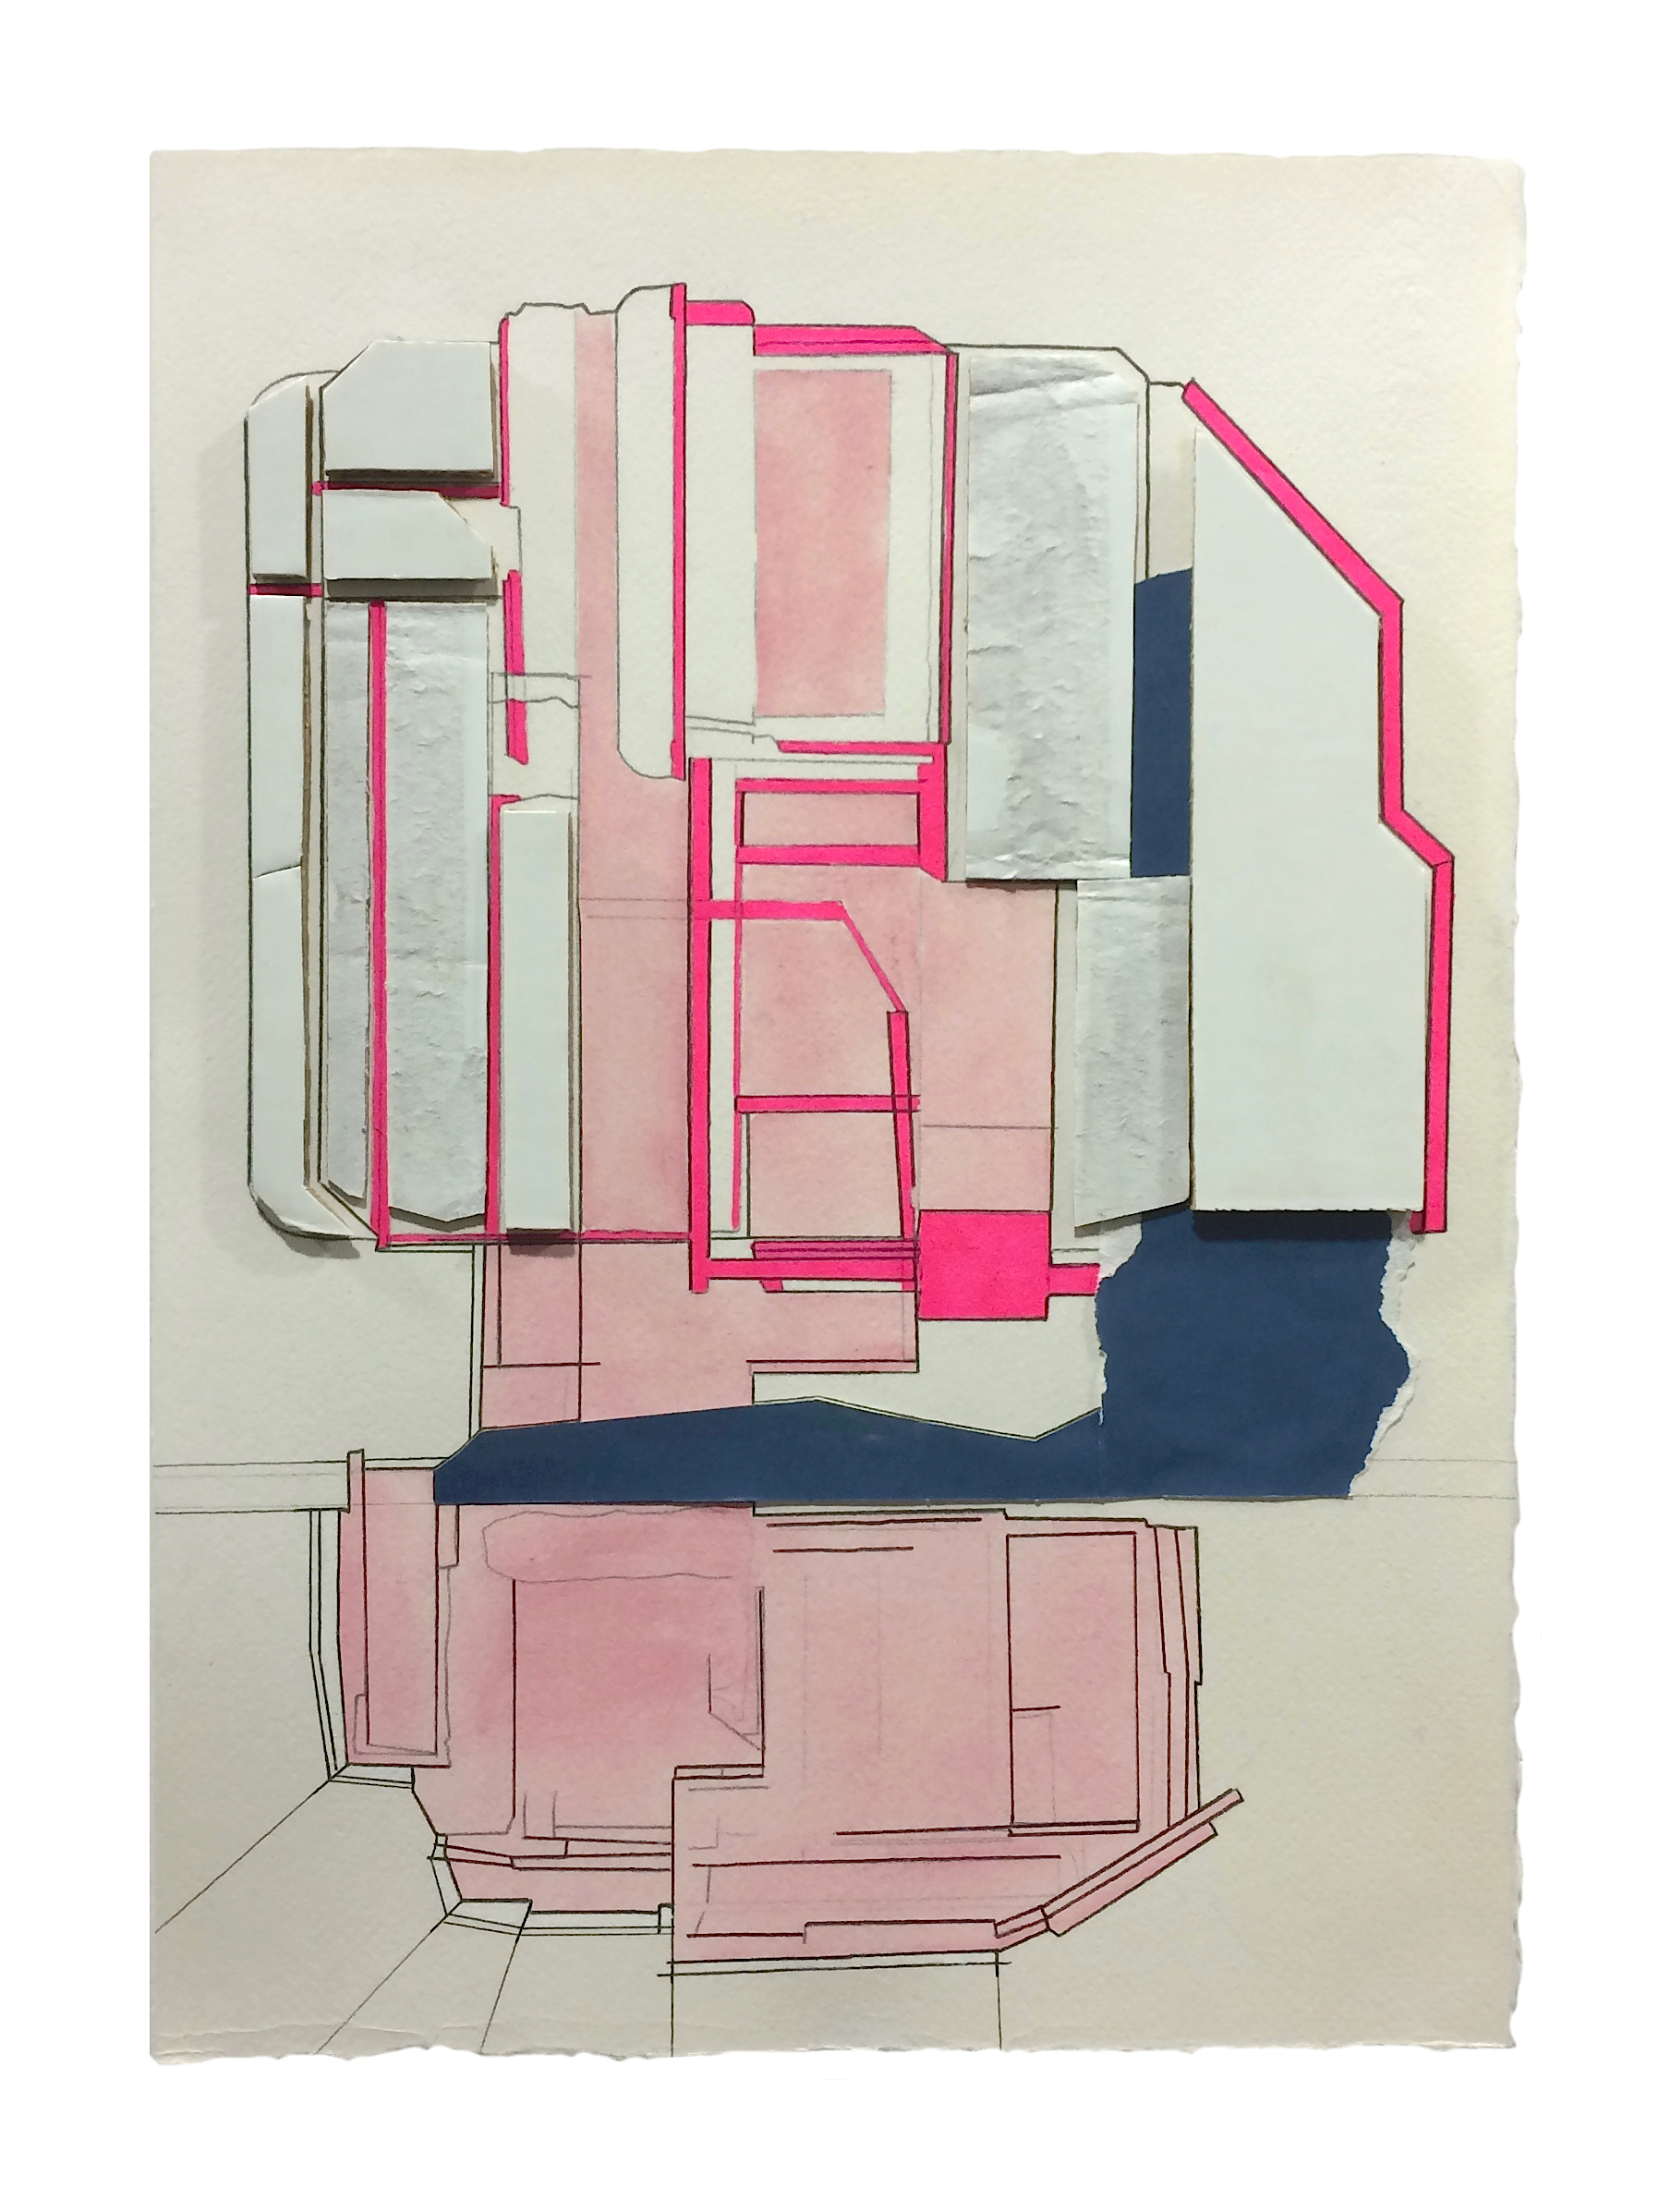    Residence  , 2016  Collage, gouache, marker, graphite on paper  13.75 x 9.75 inches       